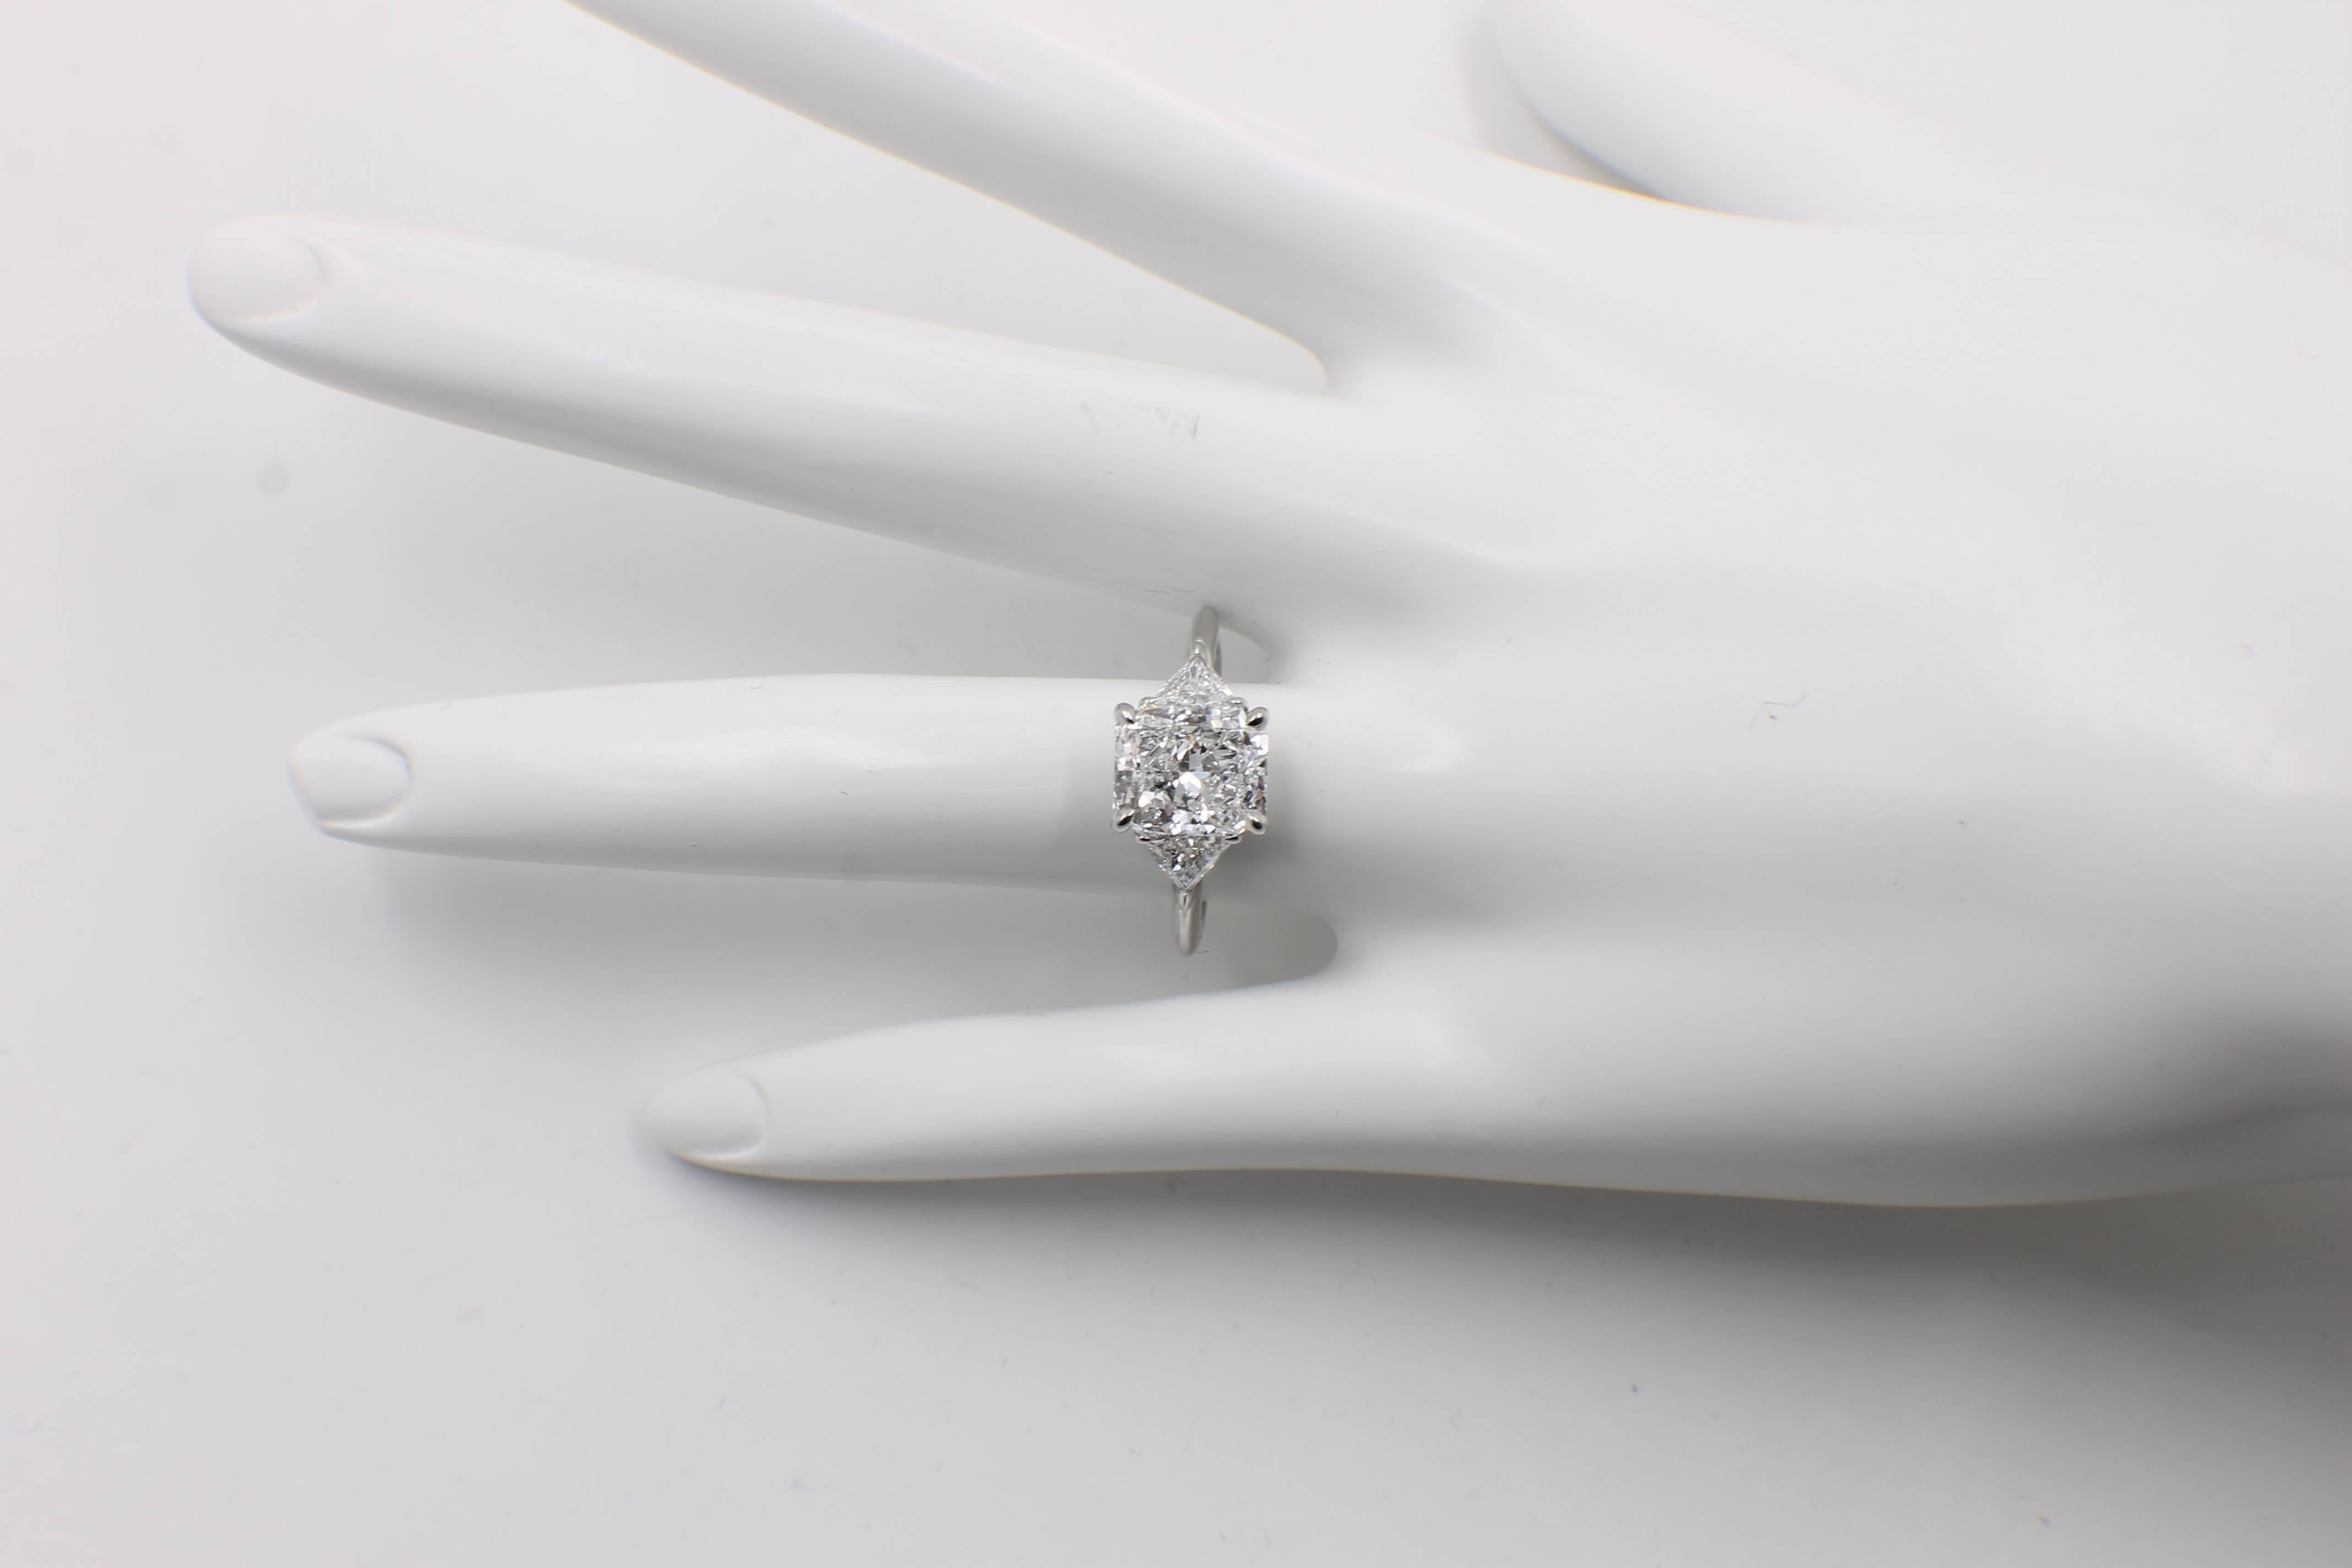 Tiffany & Co. Engagement Ring

Style:  3 Stone Diamond Engagement Ring  
Serial Number:  D27927 / GIA#10095579
Metal:  Platinum PT950
Size:   6 - sizable  
Total Carat Weight:  3.03 TCW
Diamond Shape:  Radiant Diamond 2.50 CTS
Diamond Color &